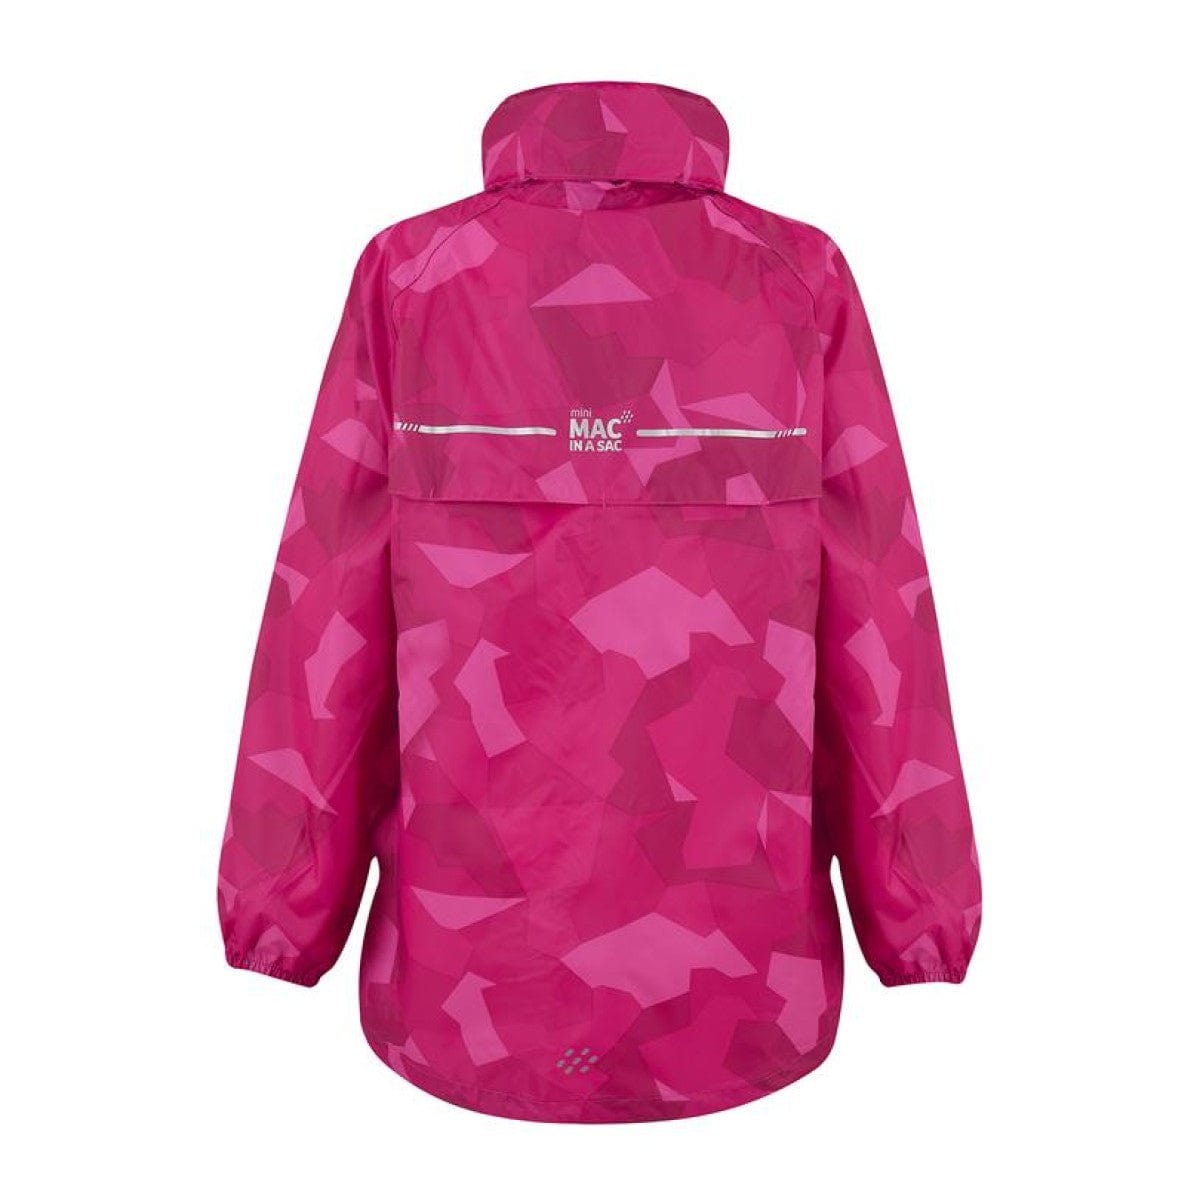 Mac In A Sac rain coat Mac In A Sac- Raincoat Edition 2 (Youth) equestrian team apparel online tack store mobile tack store custom farm apparel custom show stable clothing equestrian lifestyle horse show clothing riding clothes horses equestrian tack store